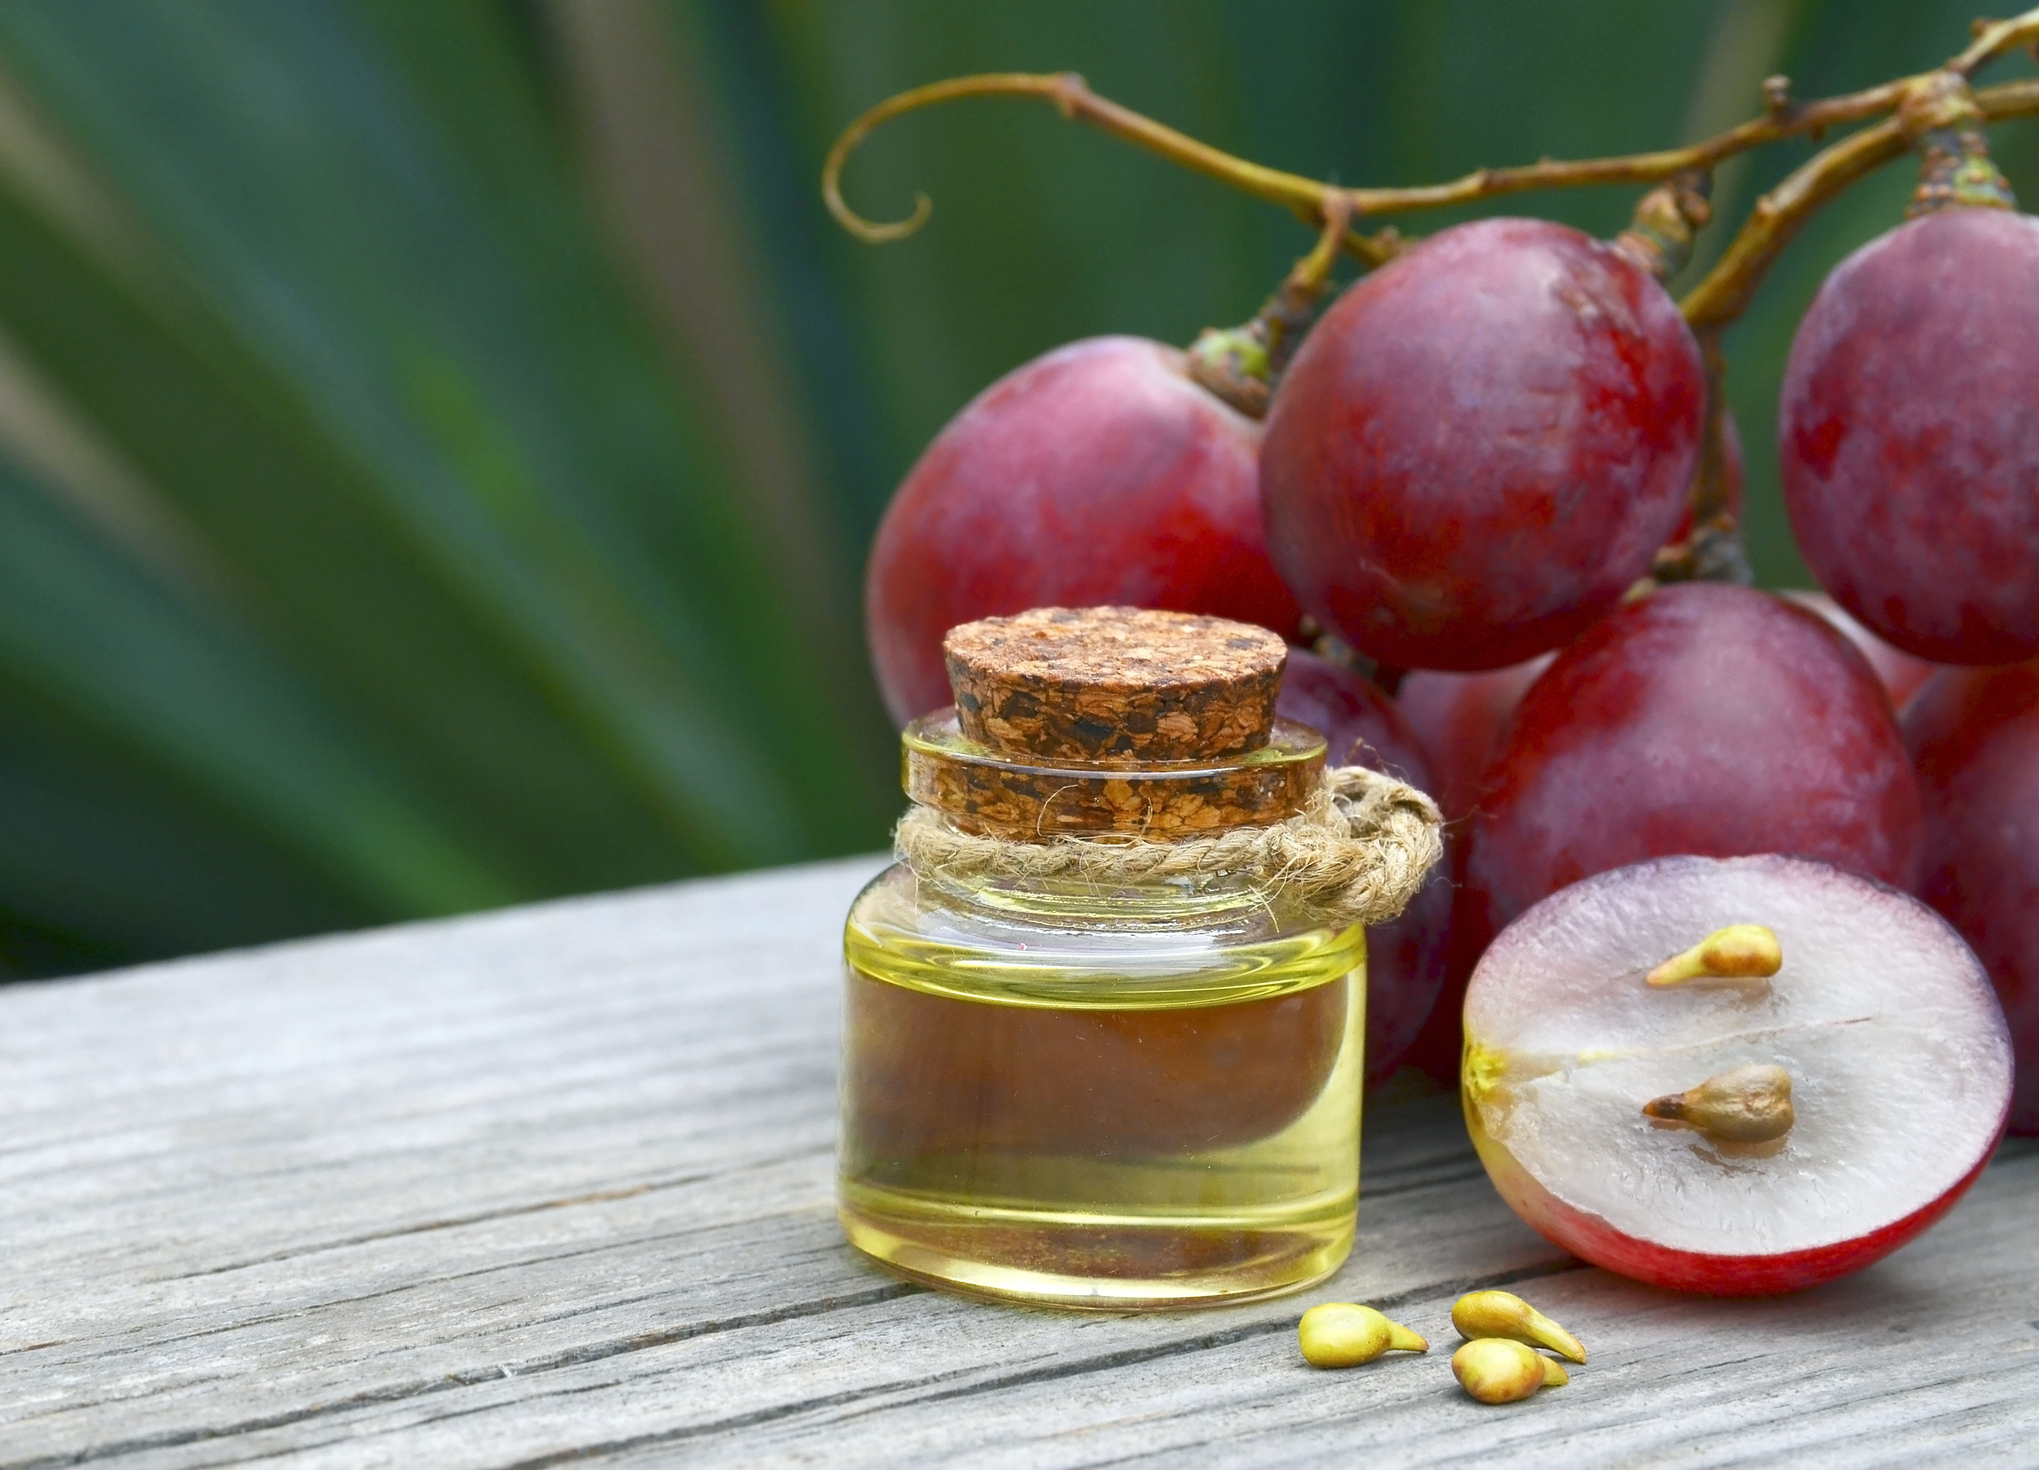 How to Use Grapeseed Oil for Hair Growth and Scalp Benefits